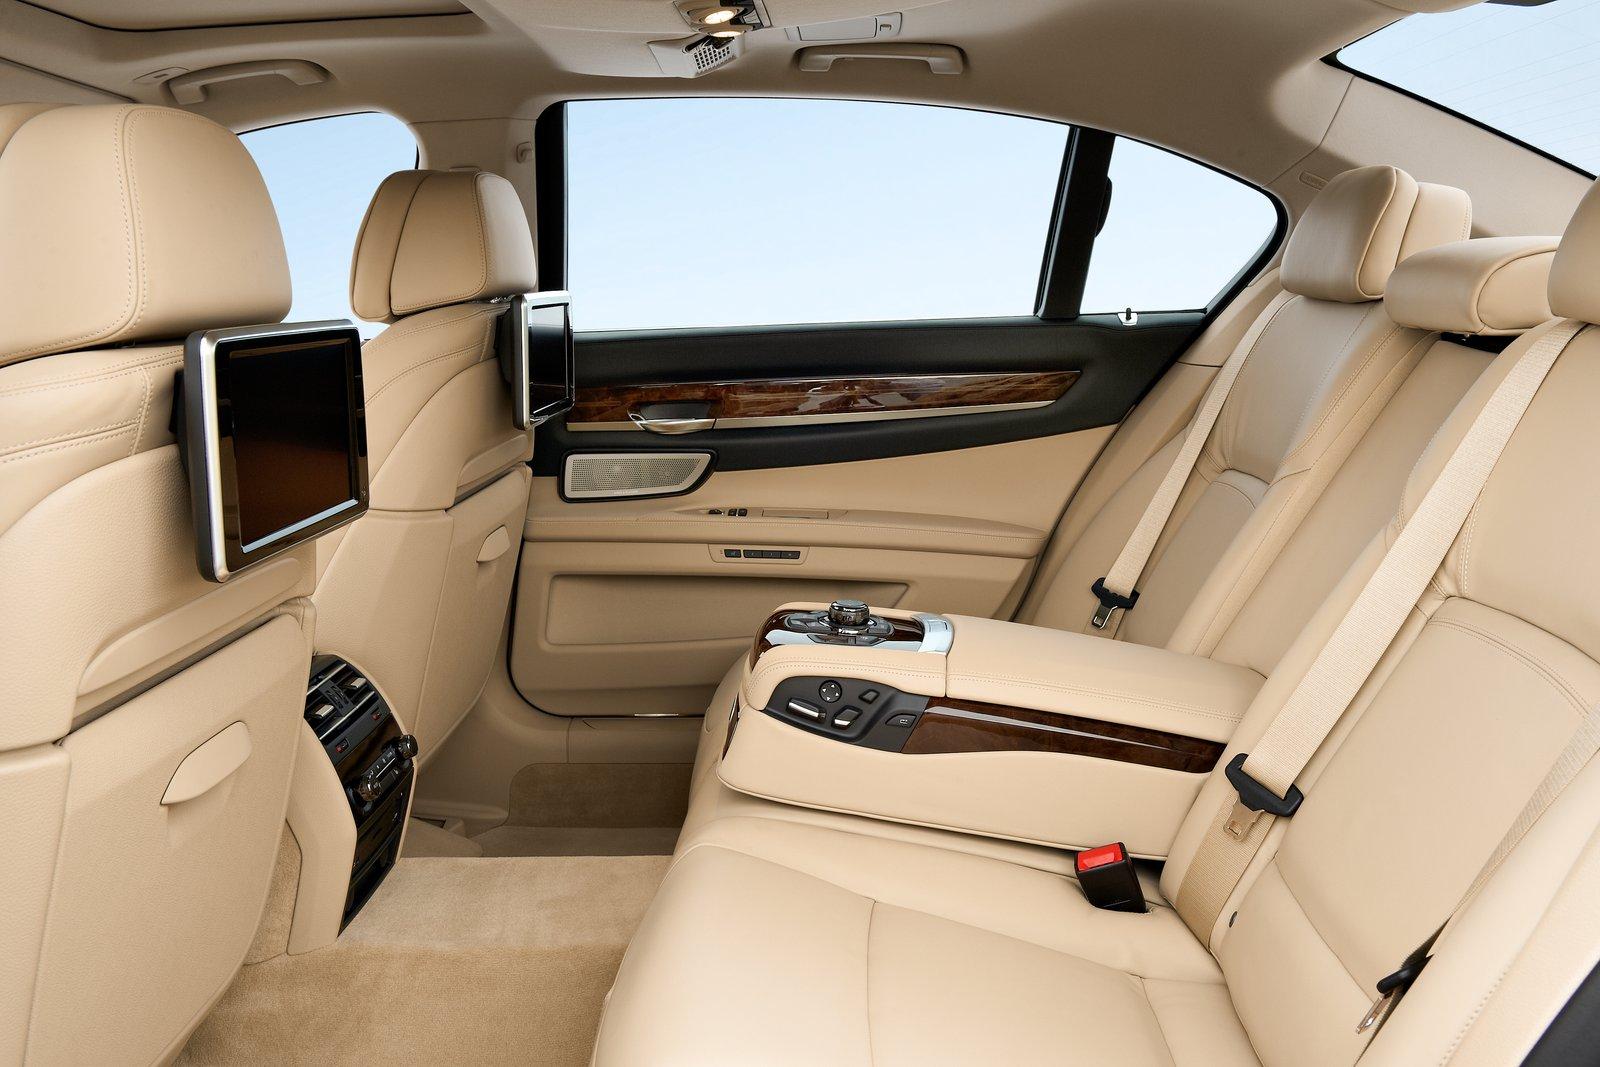 Share more than 68 bmw 7 2012 interior latest